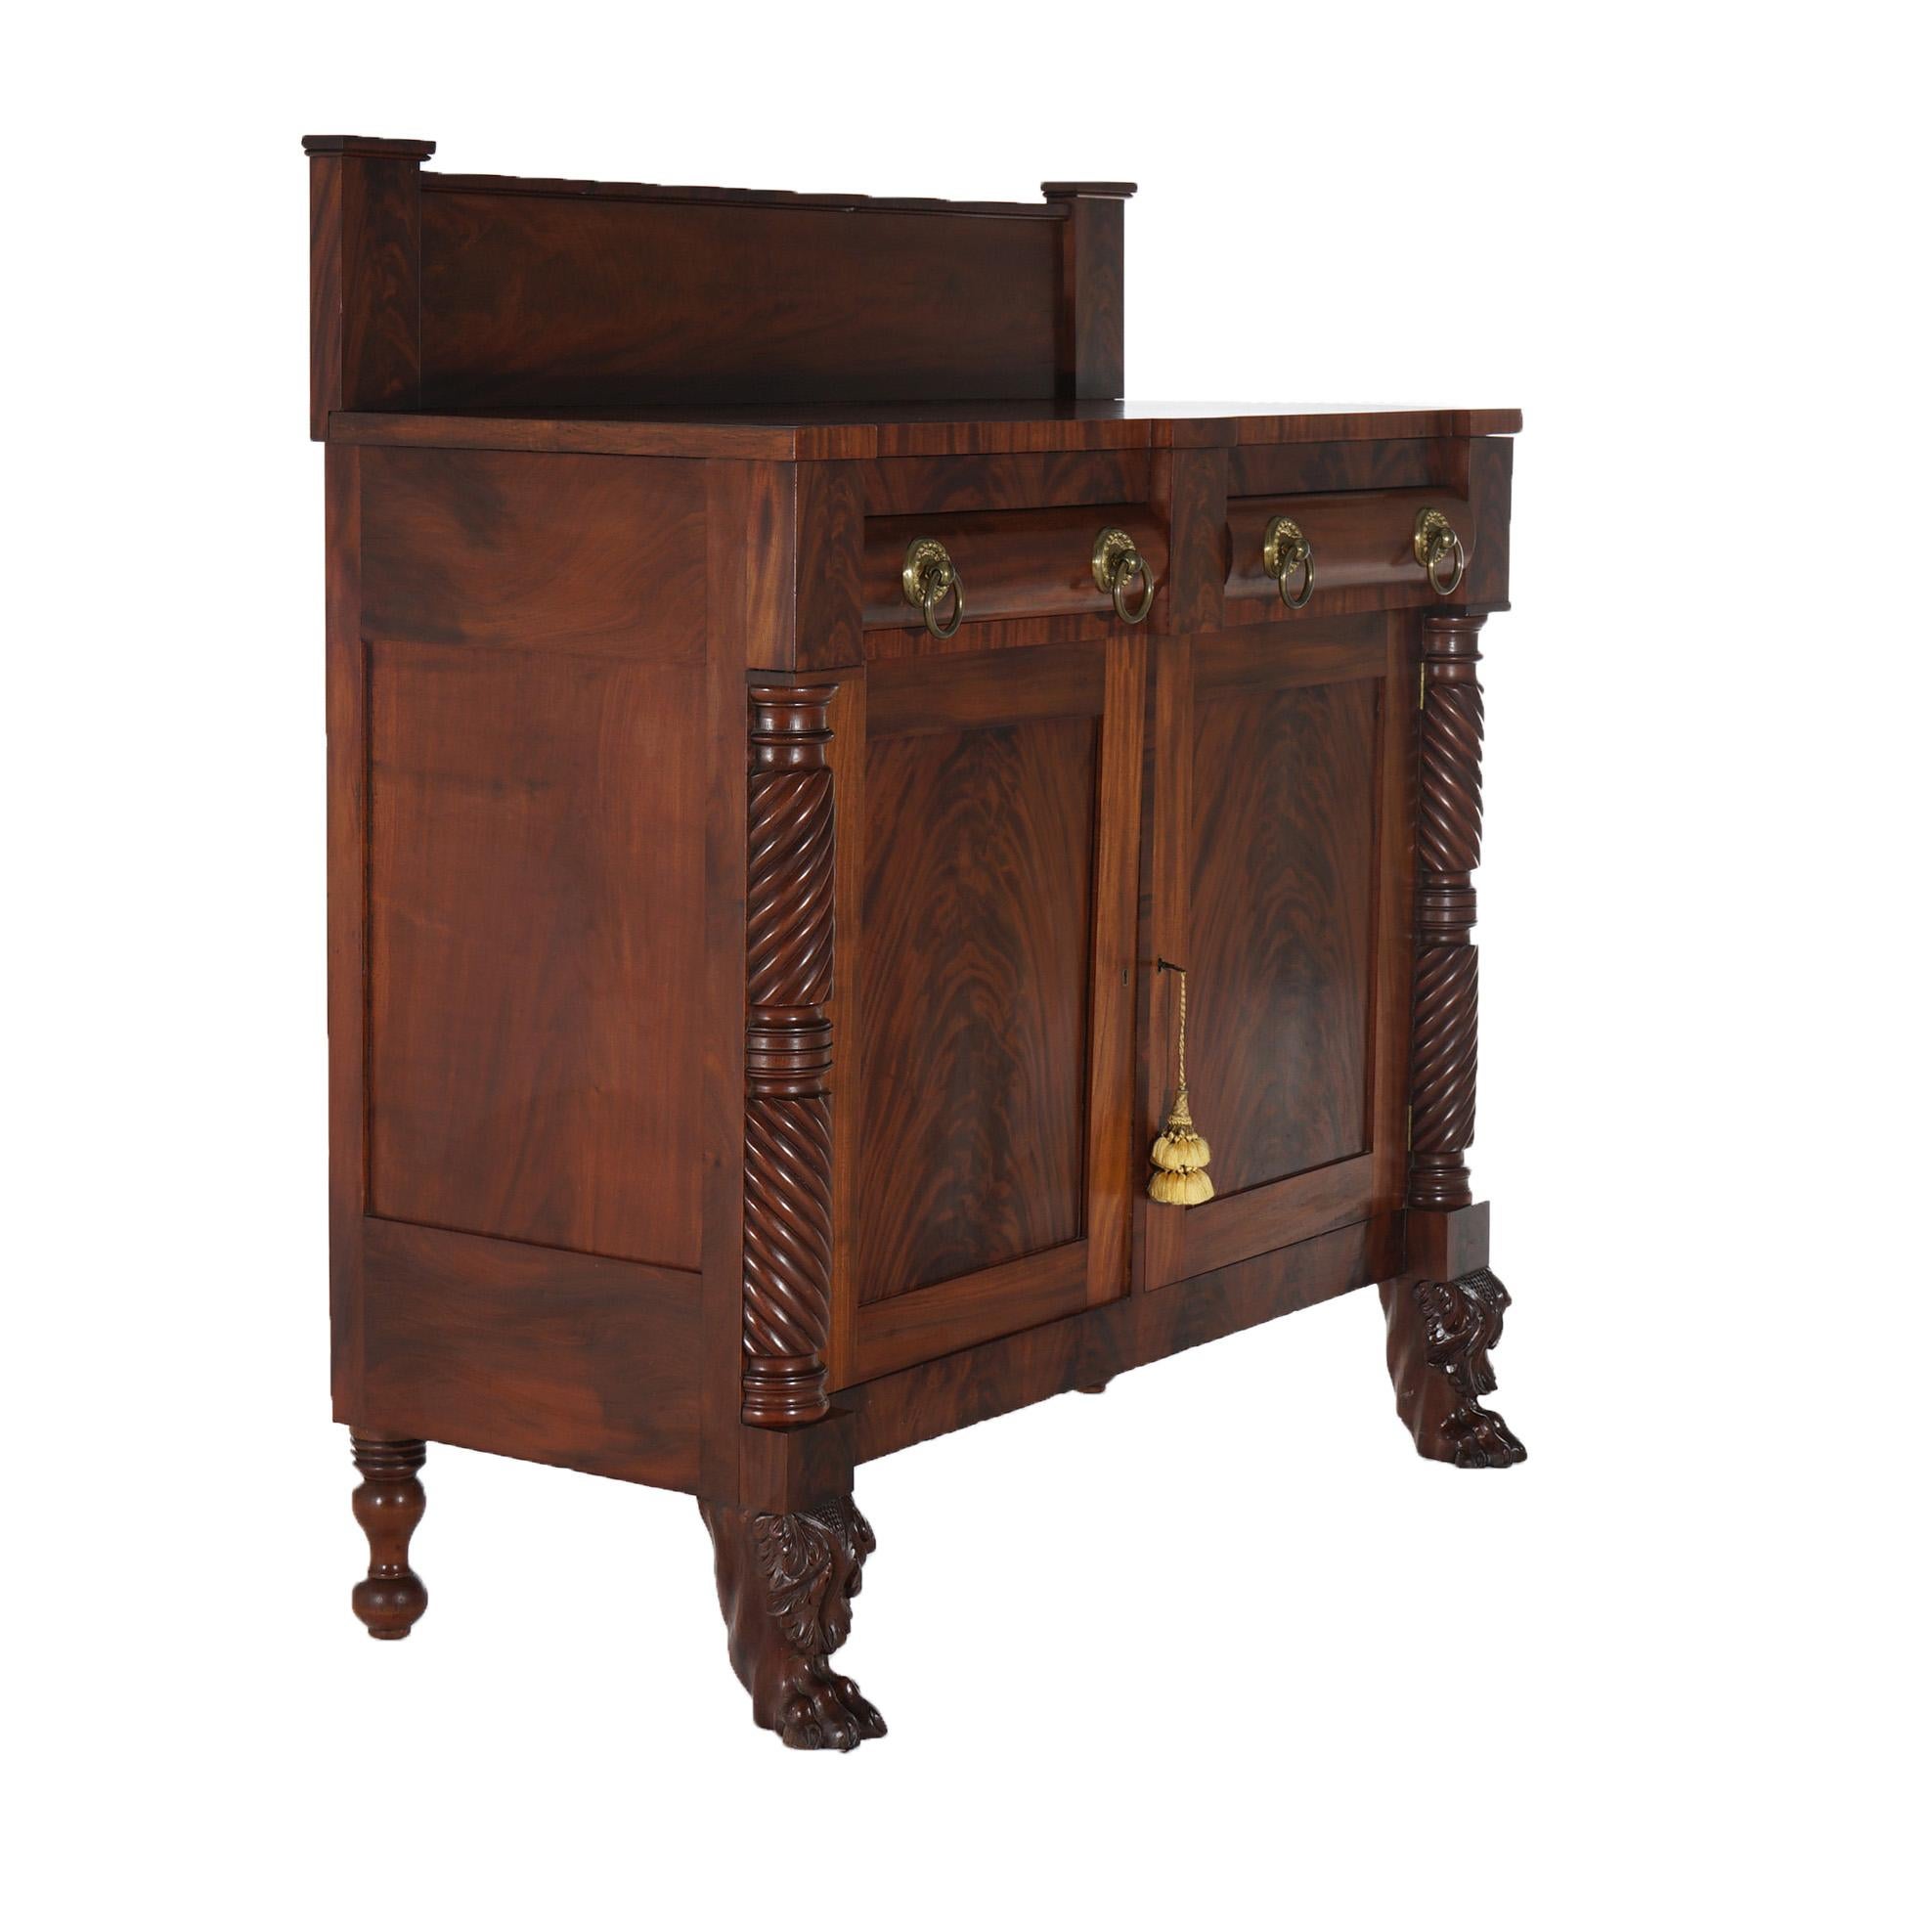 Antique American Empire Flame Mahogany Marble Top Linen Press Sideboard C1840 For Sale 2